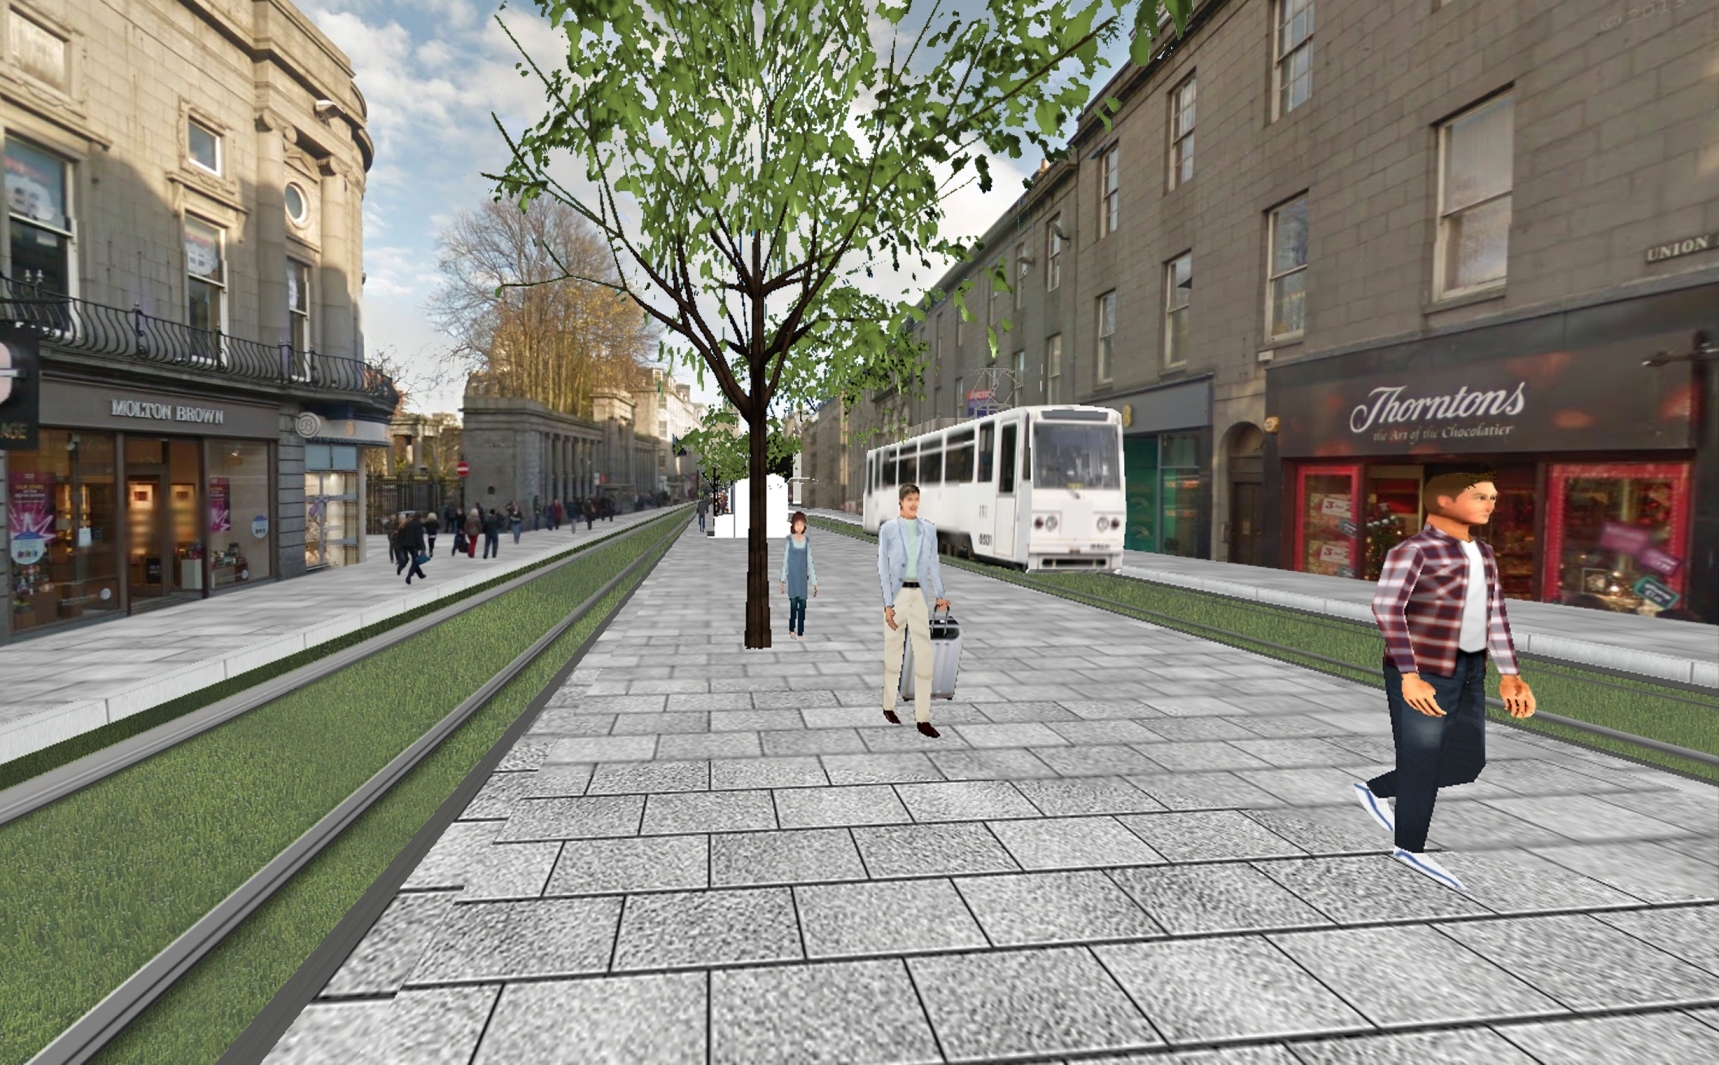 This image shows Dr Bennadji's vision for Union Street